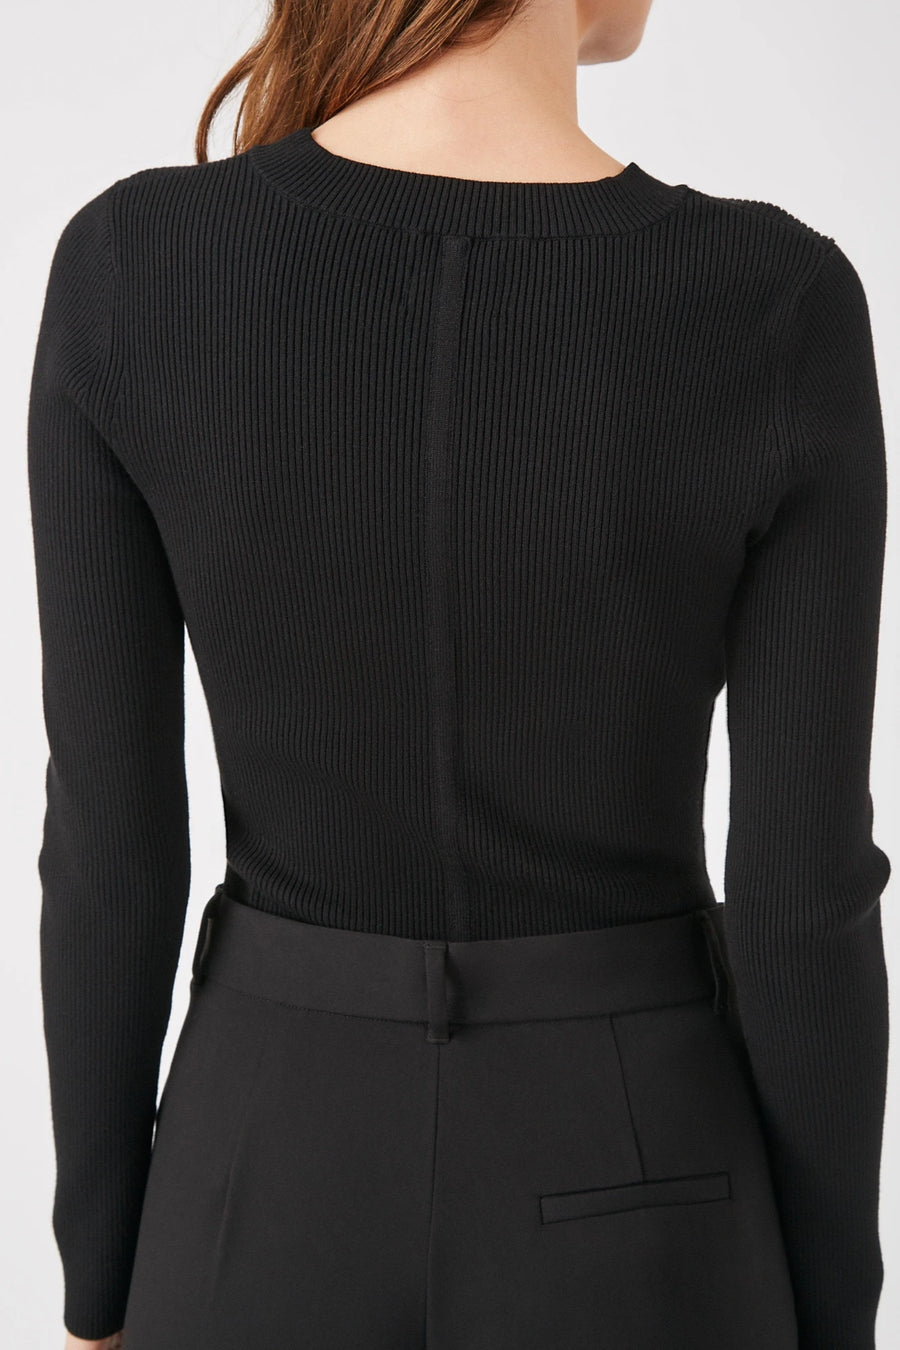 The Galloway long sleeve ribbed top in black by Greyven